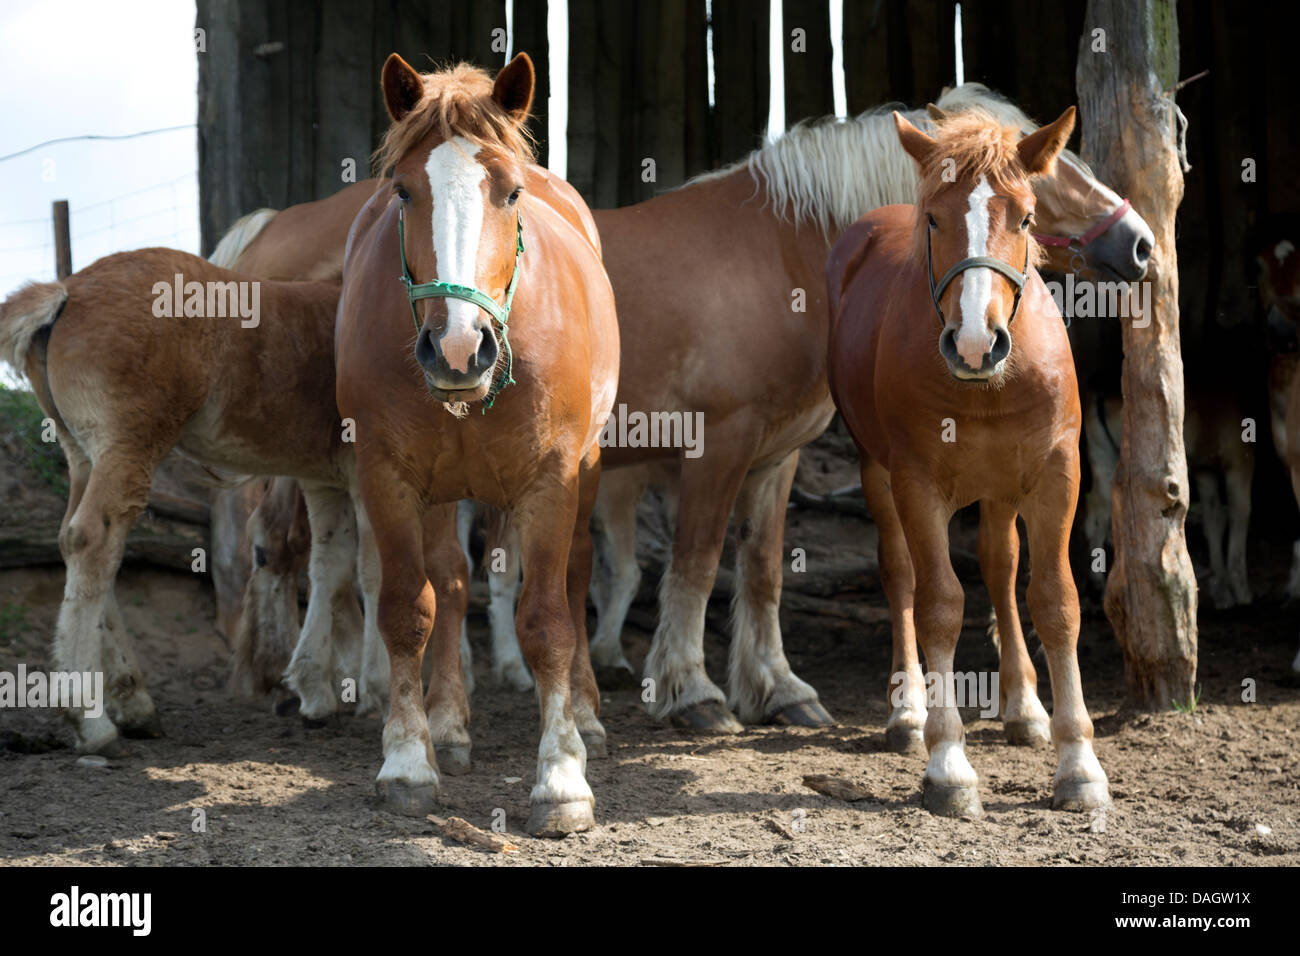 Horses in a shed, Poland. Stock Photo